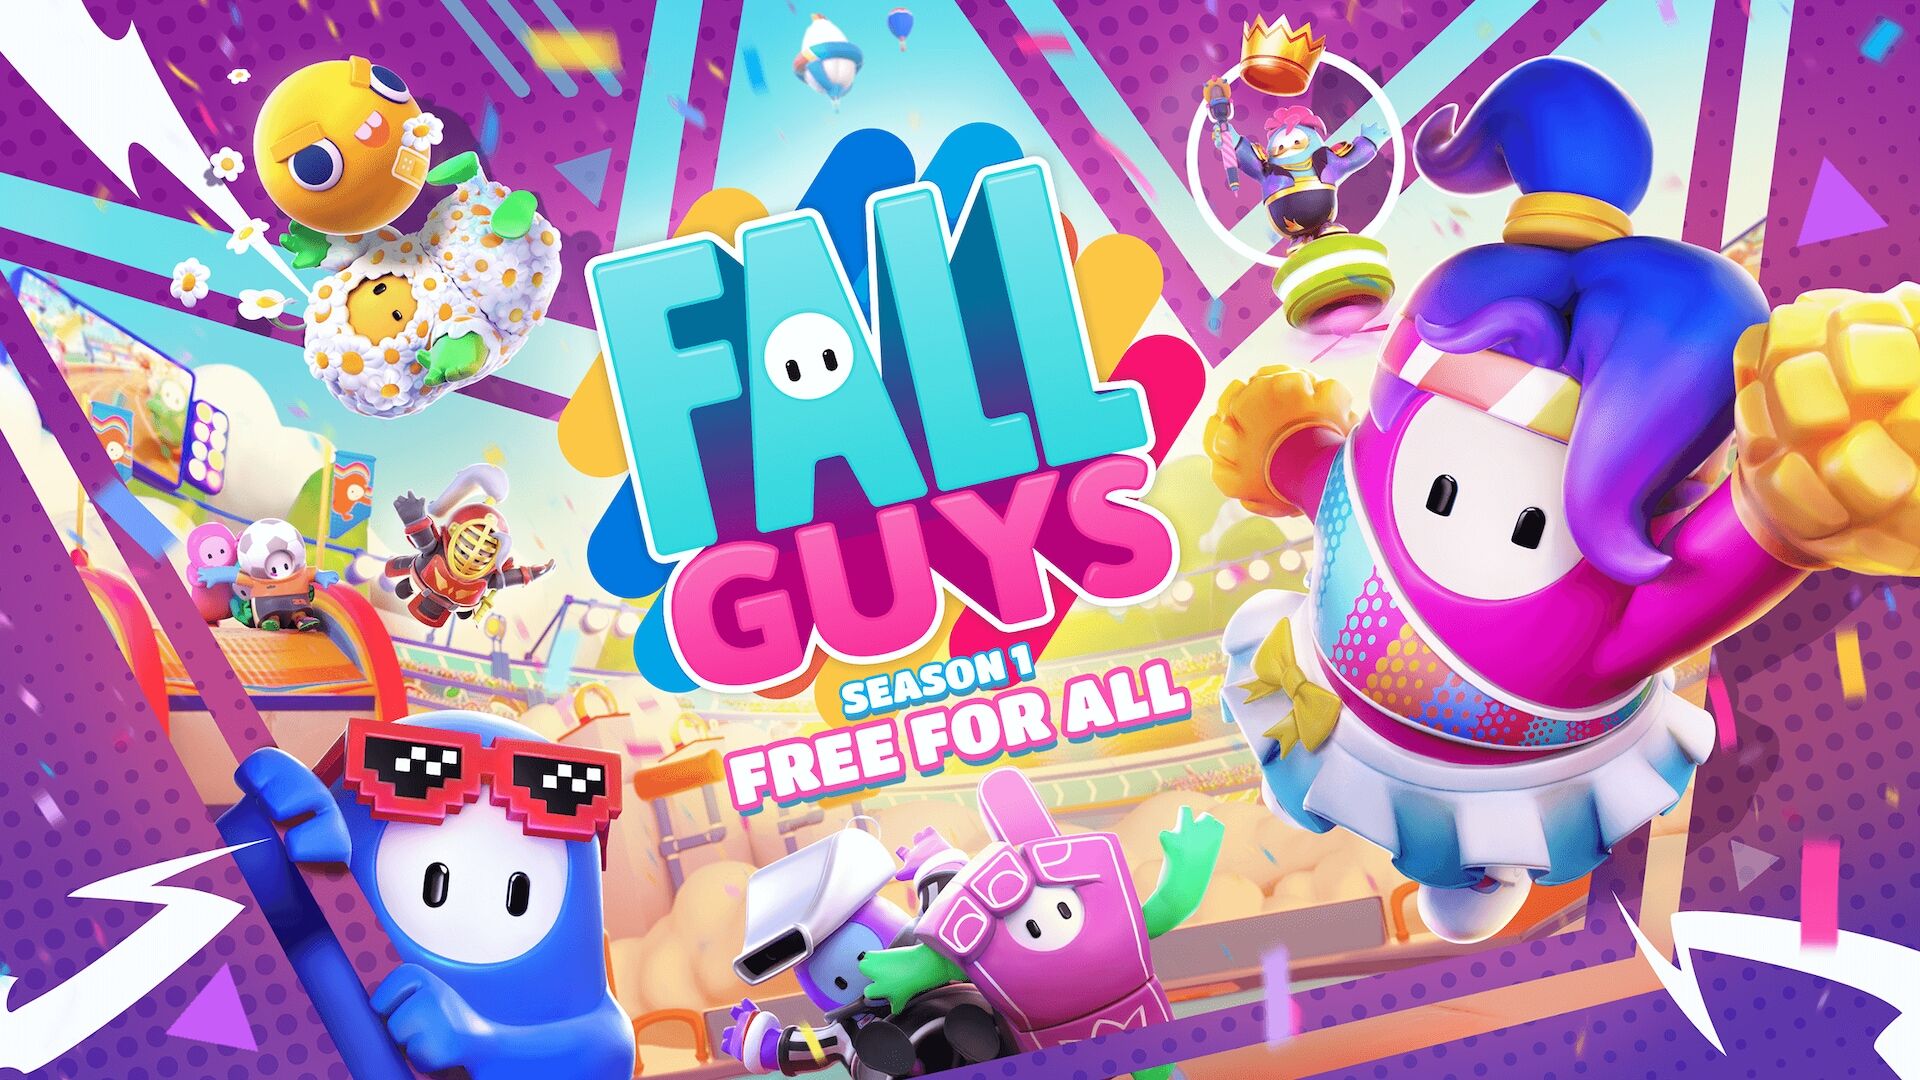 Fall Guys is Now Free to Play on Epic Games Store